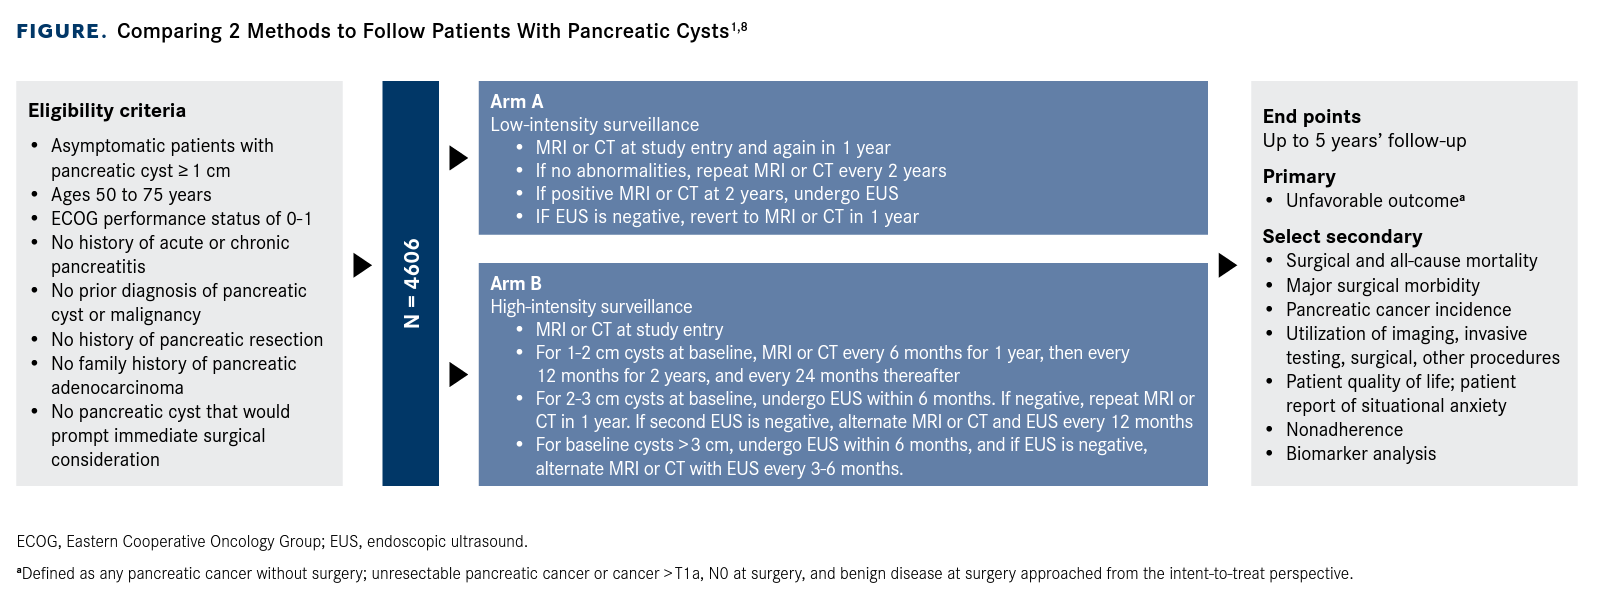 Comparing 2 Methods to Follow Patients With Pancreatic Cysts